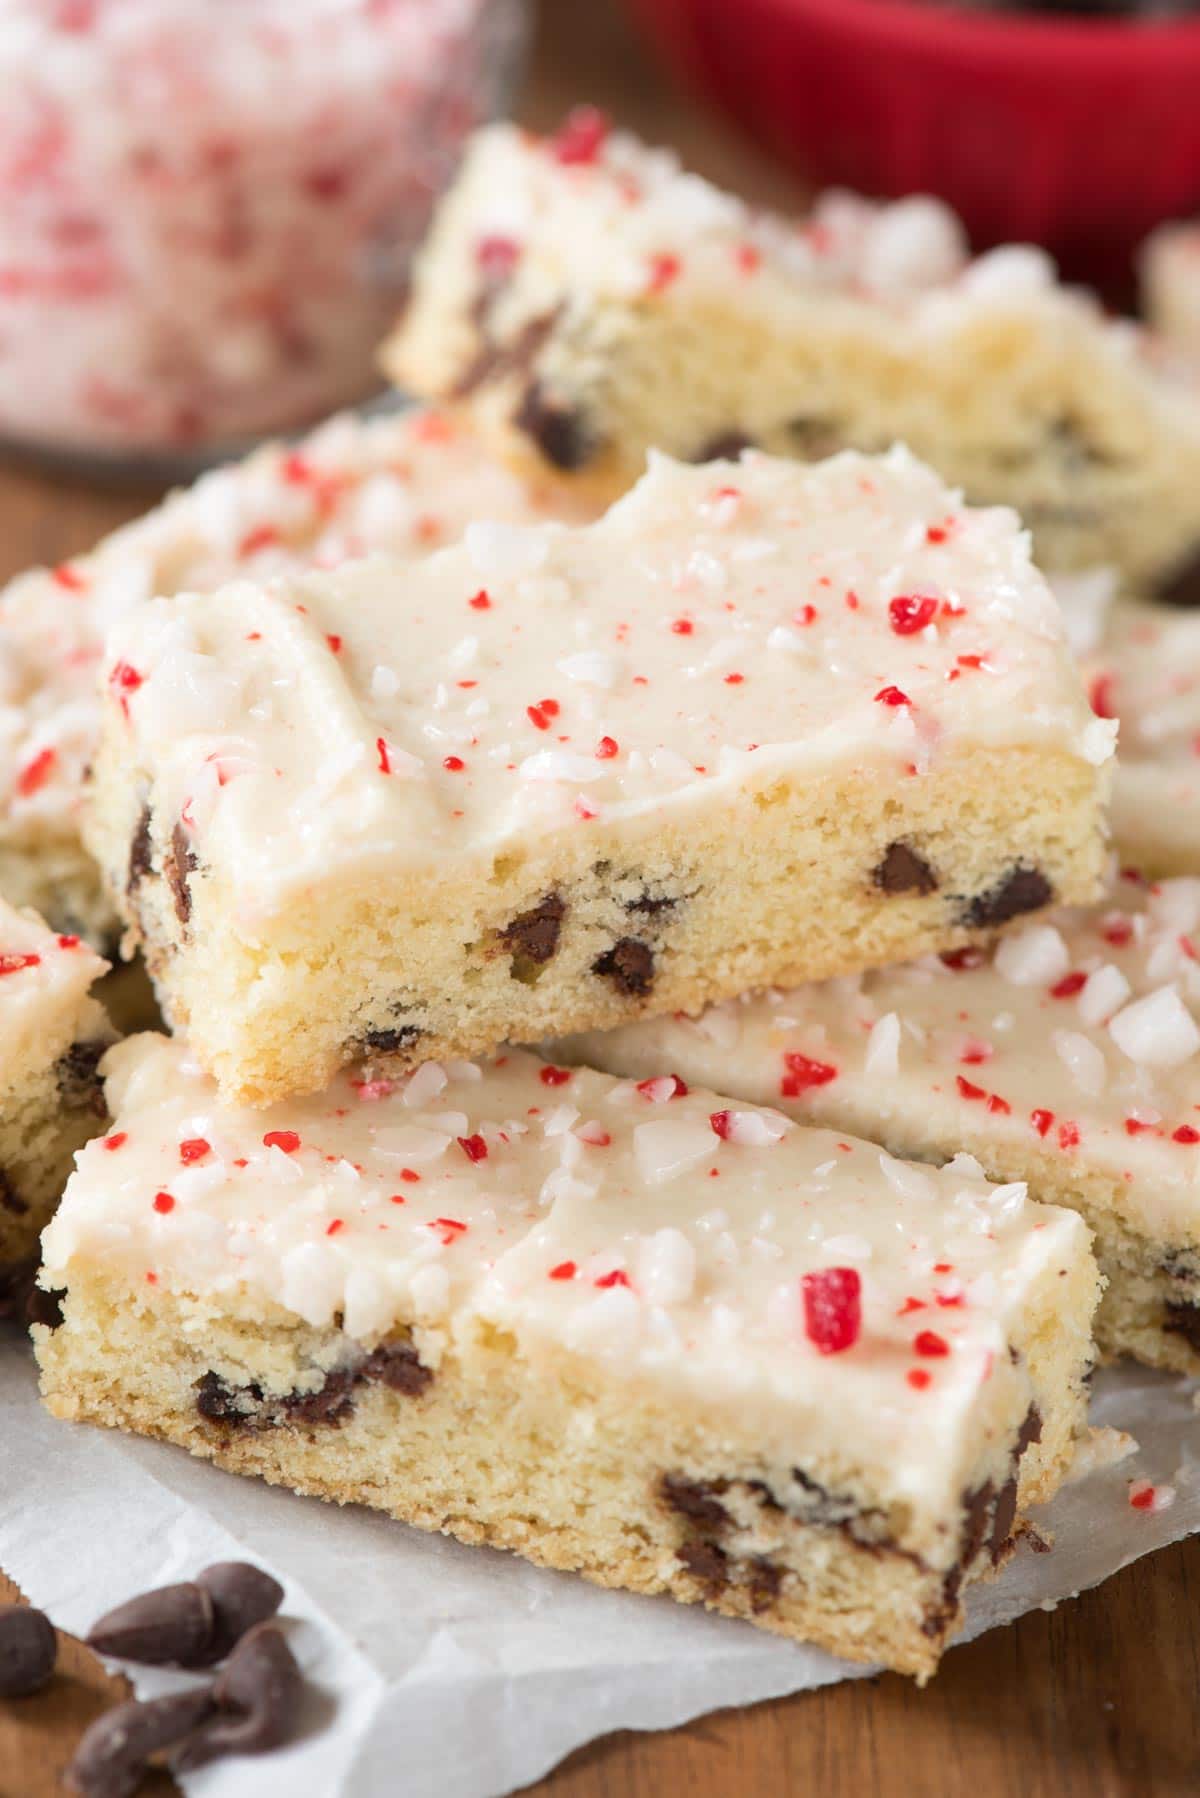 Peppermint Chocolate Chip Sugar Cookie Sticks - this easy sugar cookie recipe is filled with chocolate chips and peppermint flavor! They're perfect for Christmas!